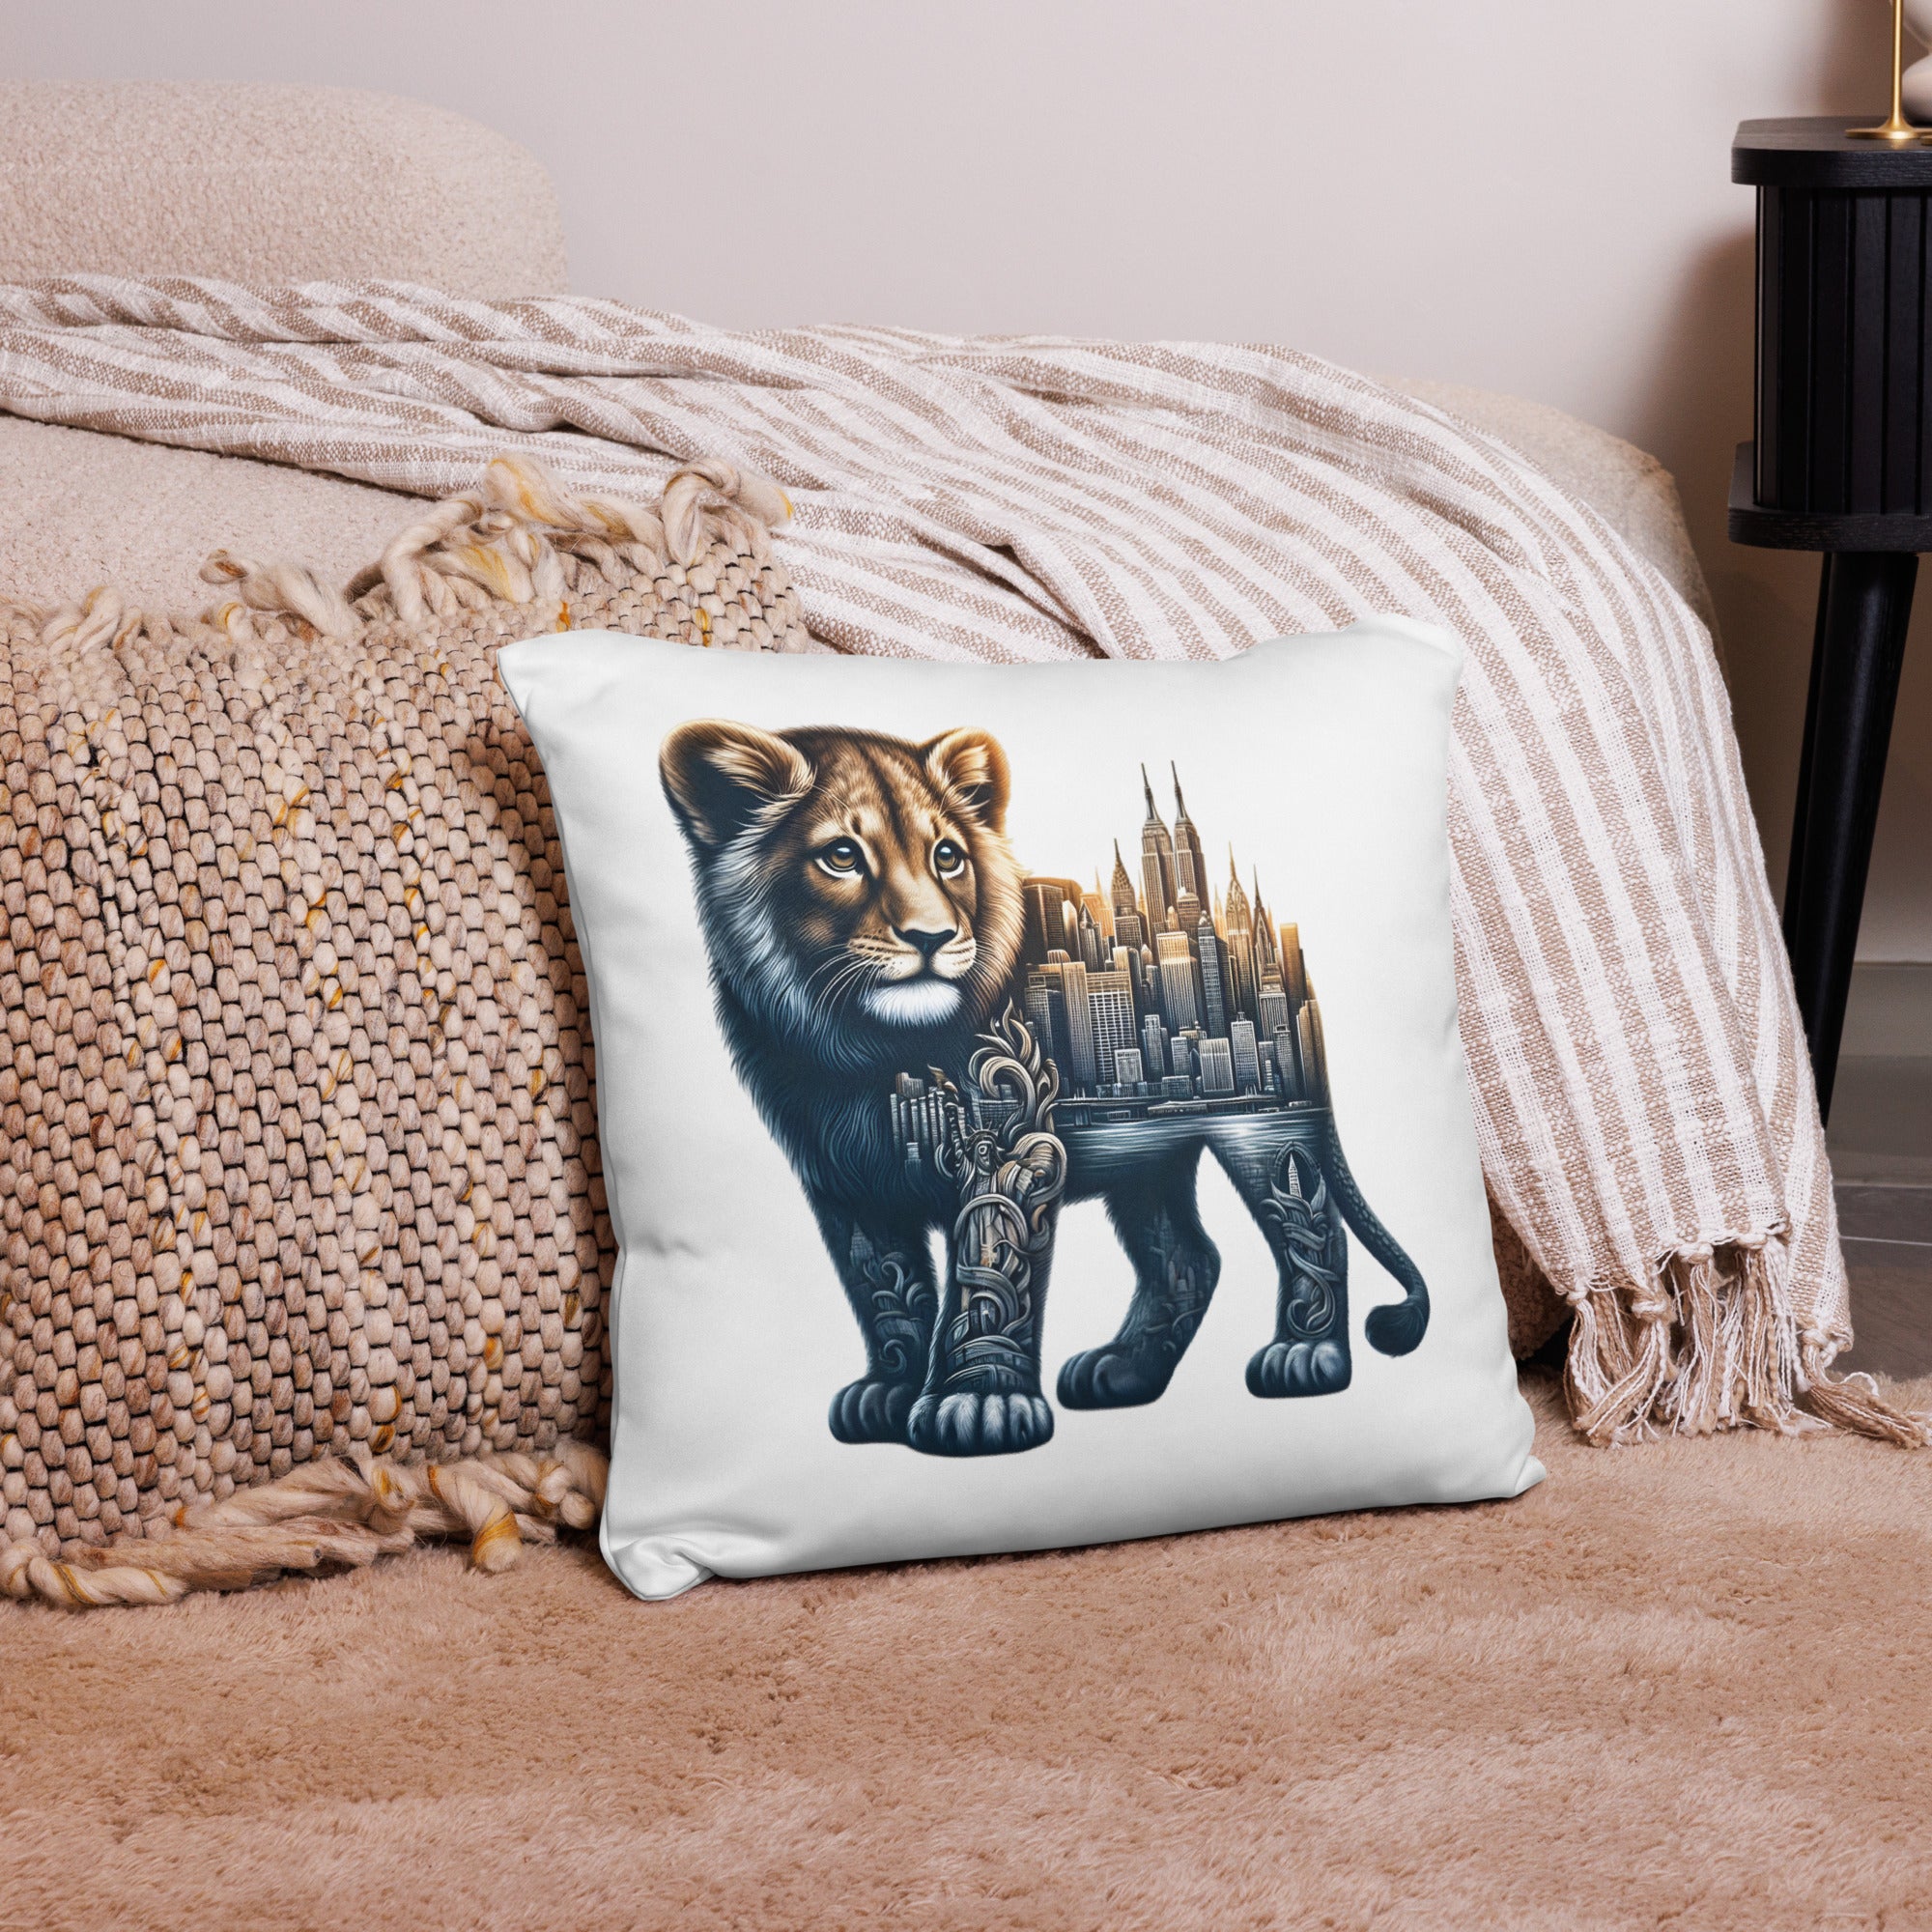 New York Lion Cushion: Animal Pillow Design for Home Decor and Lifestyle